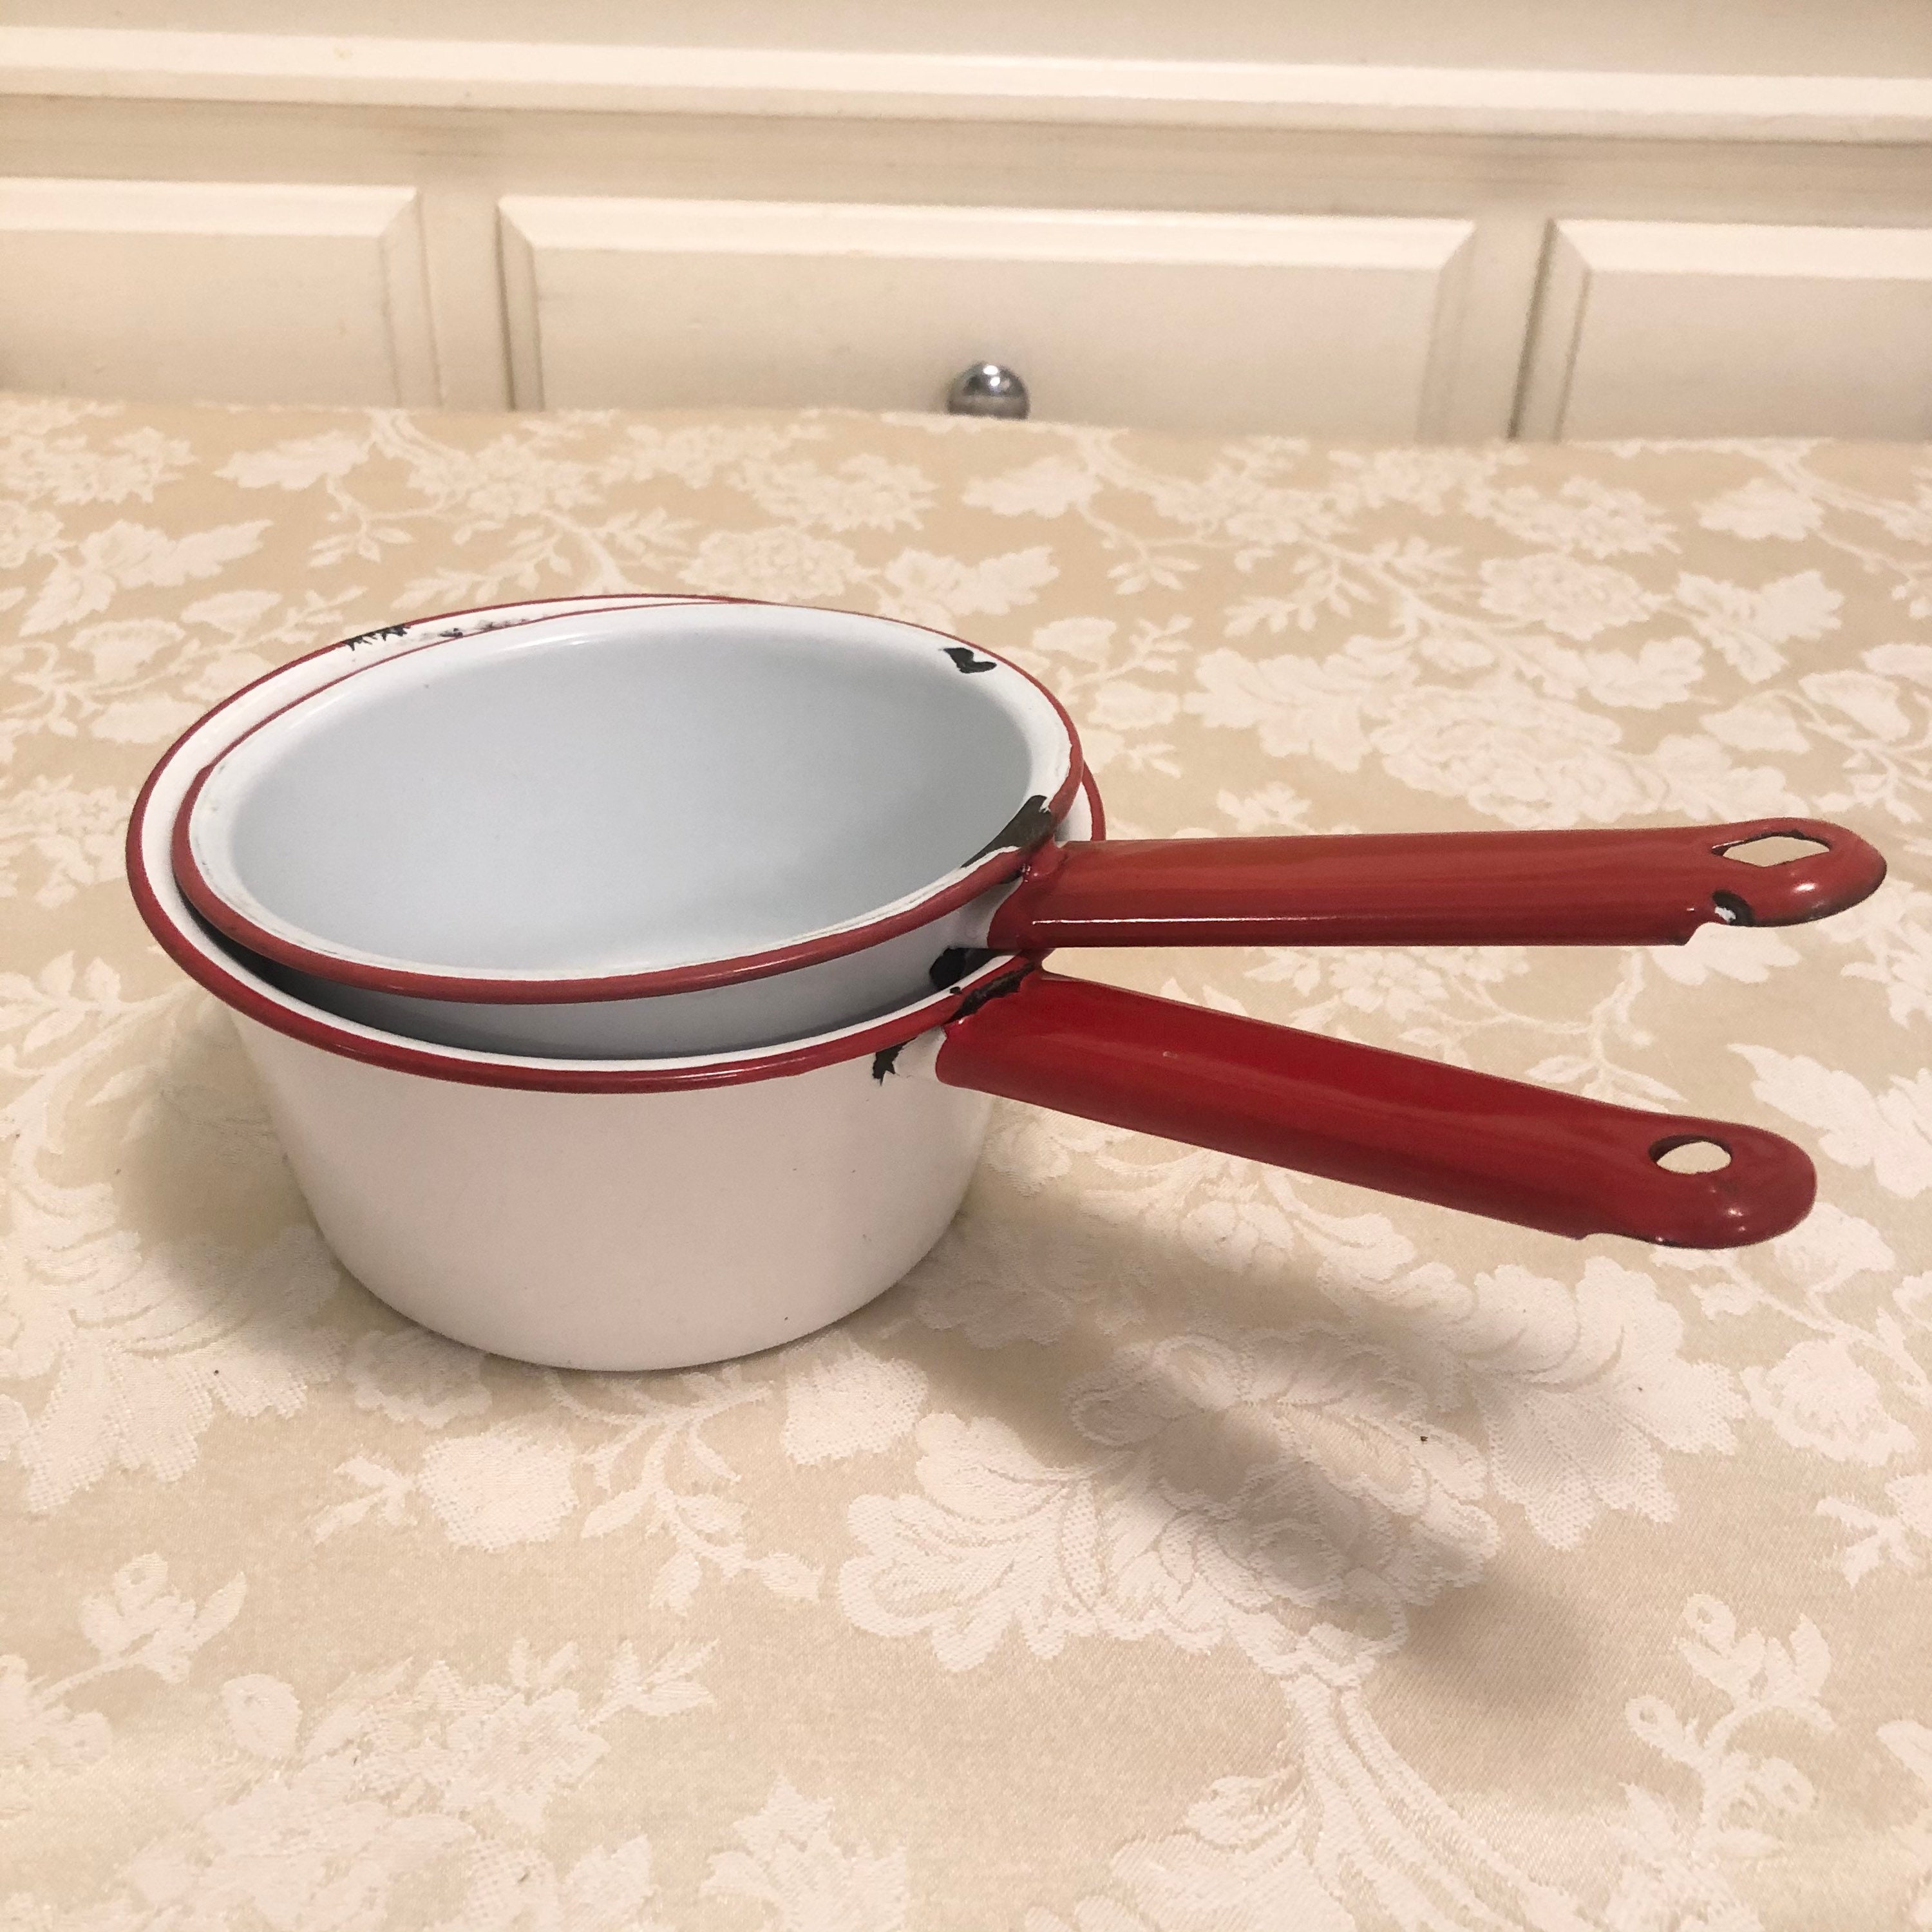 Enamel Cookware 3 Quart Stock Pot Dutch Oven Saucepan Vintage Distressed  White With Red Rim Round Enamelware Cooking Pan With Lid 